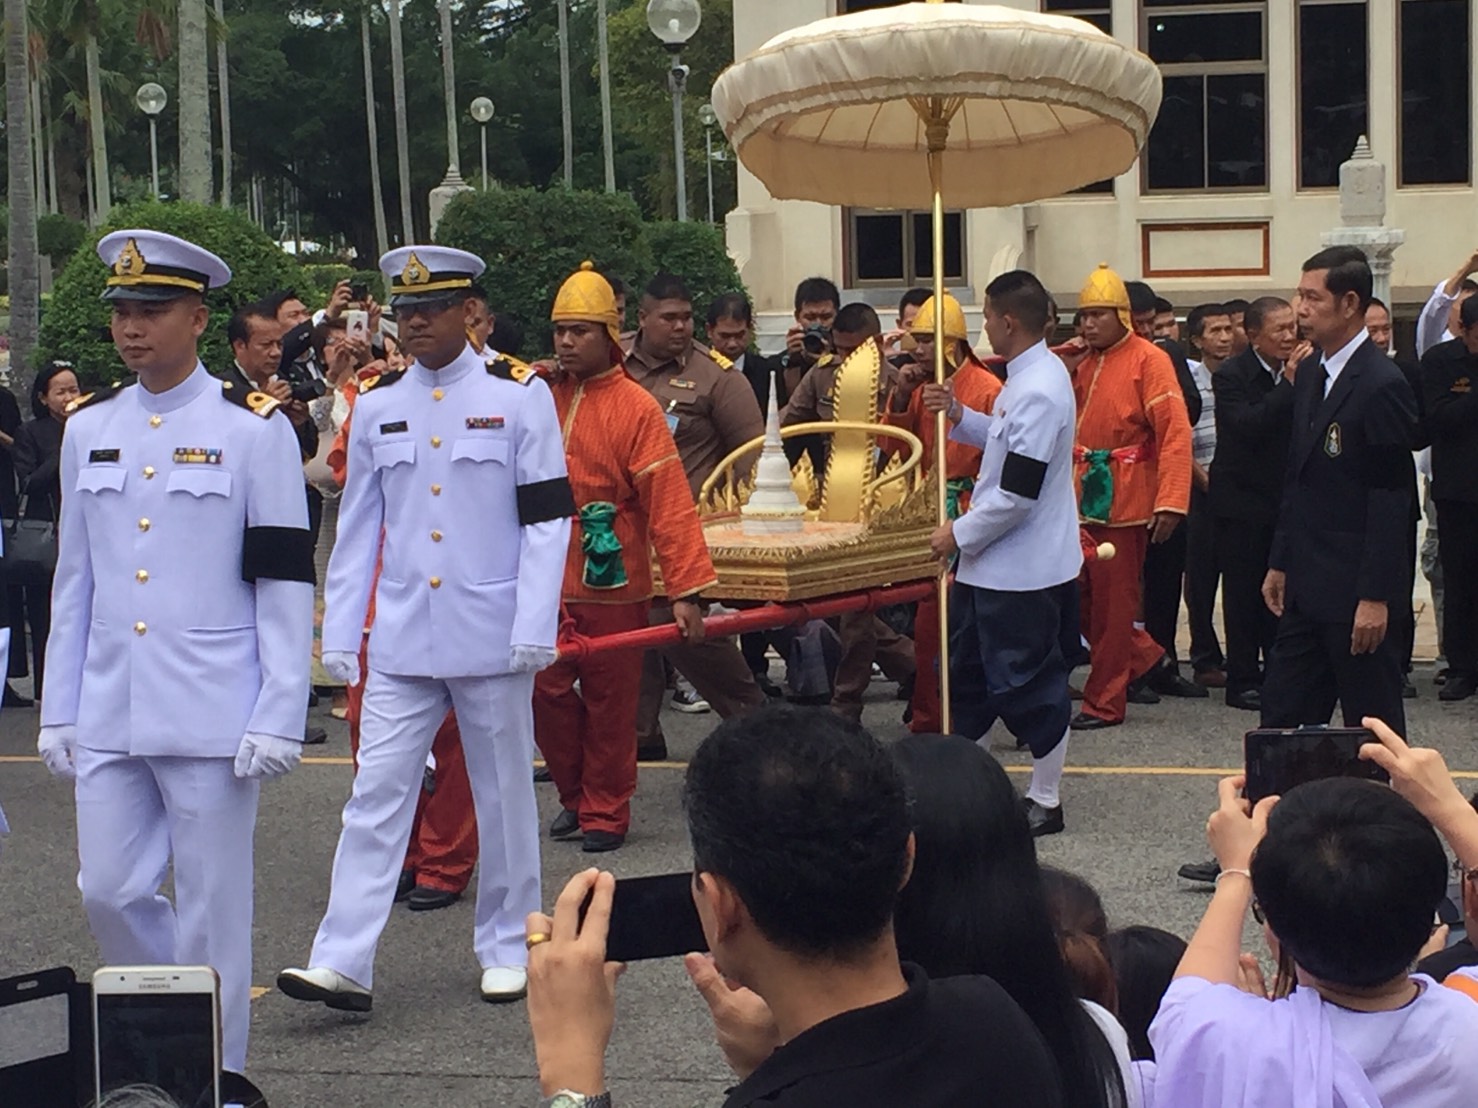 The relics of the late Supreme Patriarch Somdet Phra Nyanasamvara Suvaddhana Mahathera are brought in to be placed in the temple’s marble pavilion.